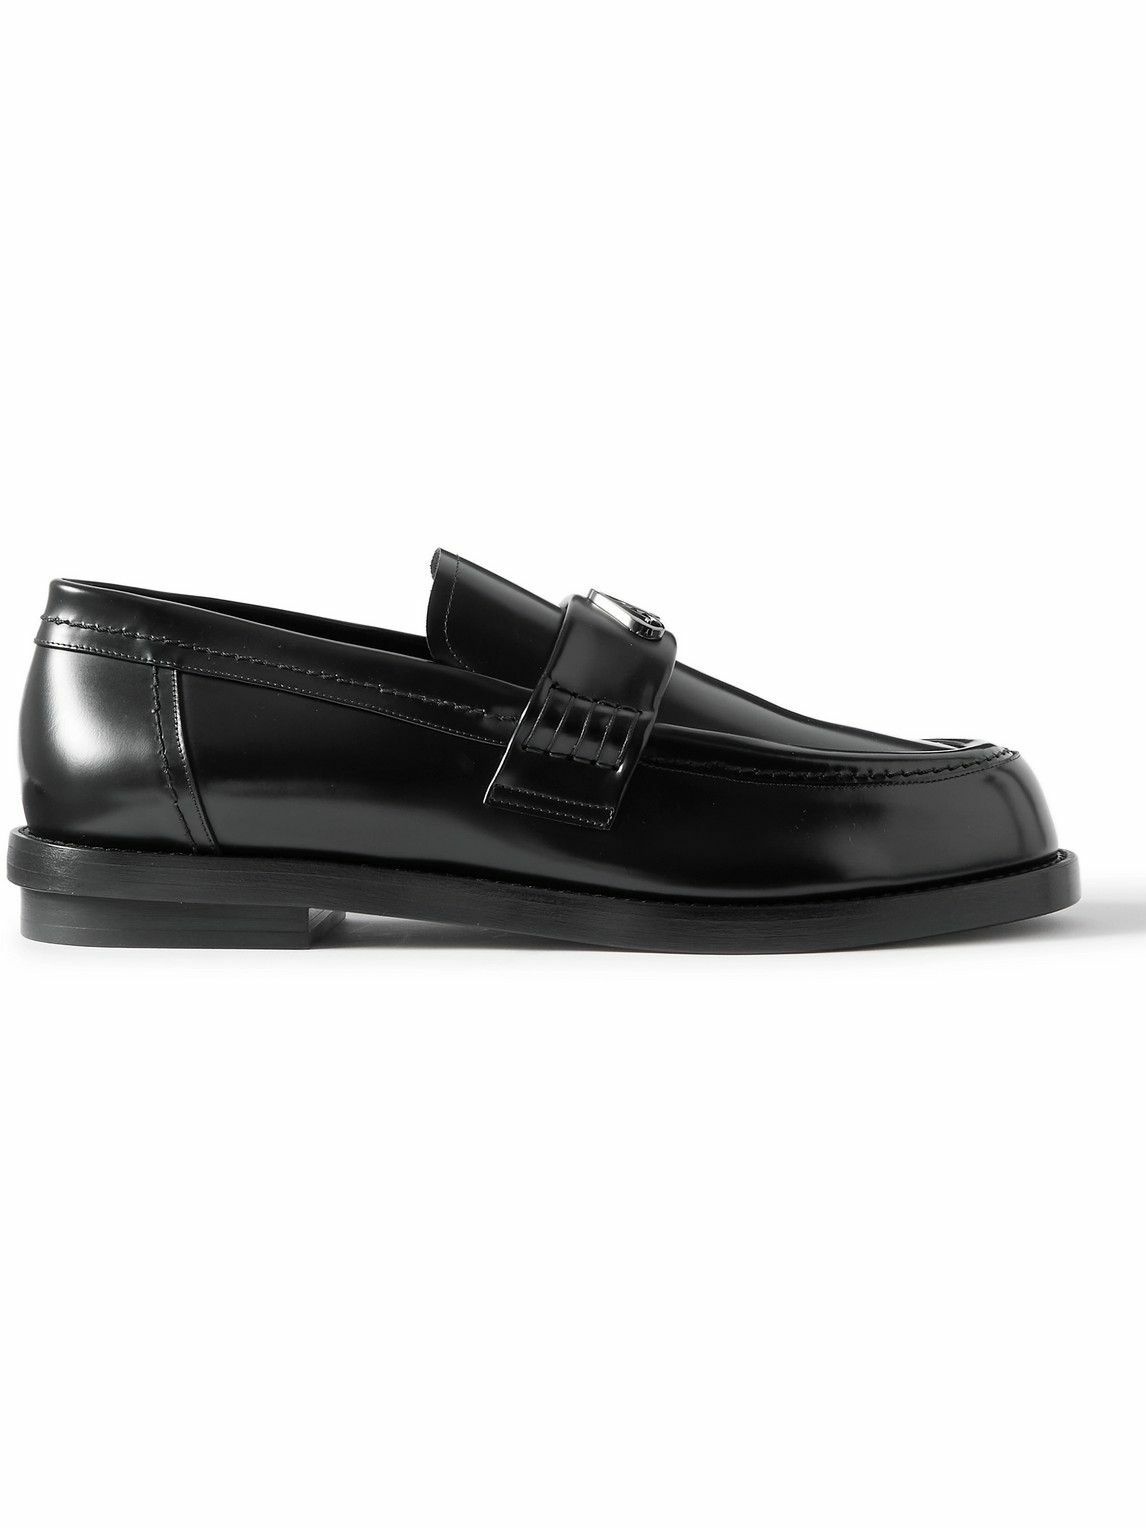 Photo: Alexander McQueen - Seal Embellished Patent-Leather Penny Loafers - Black